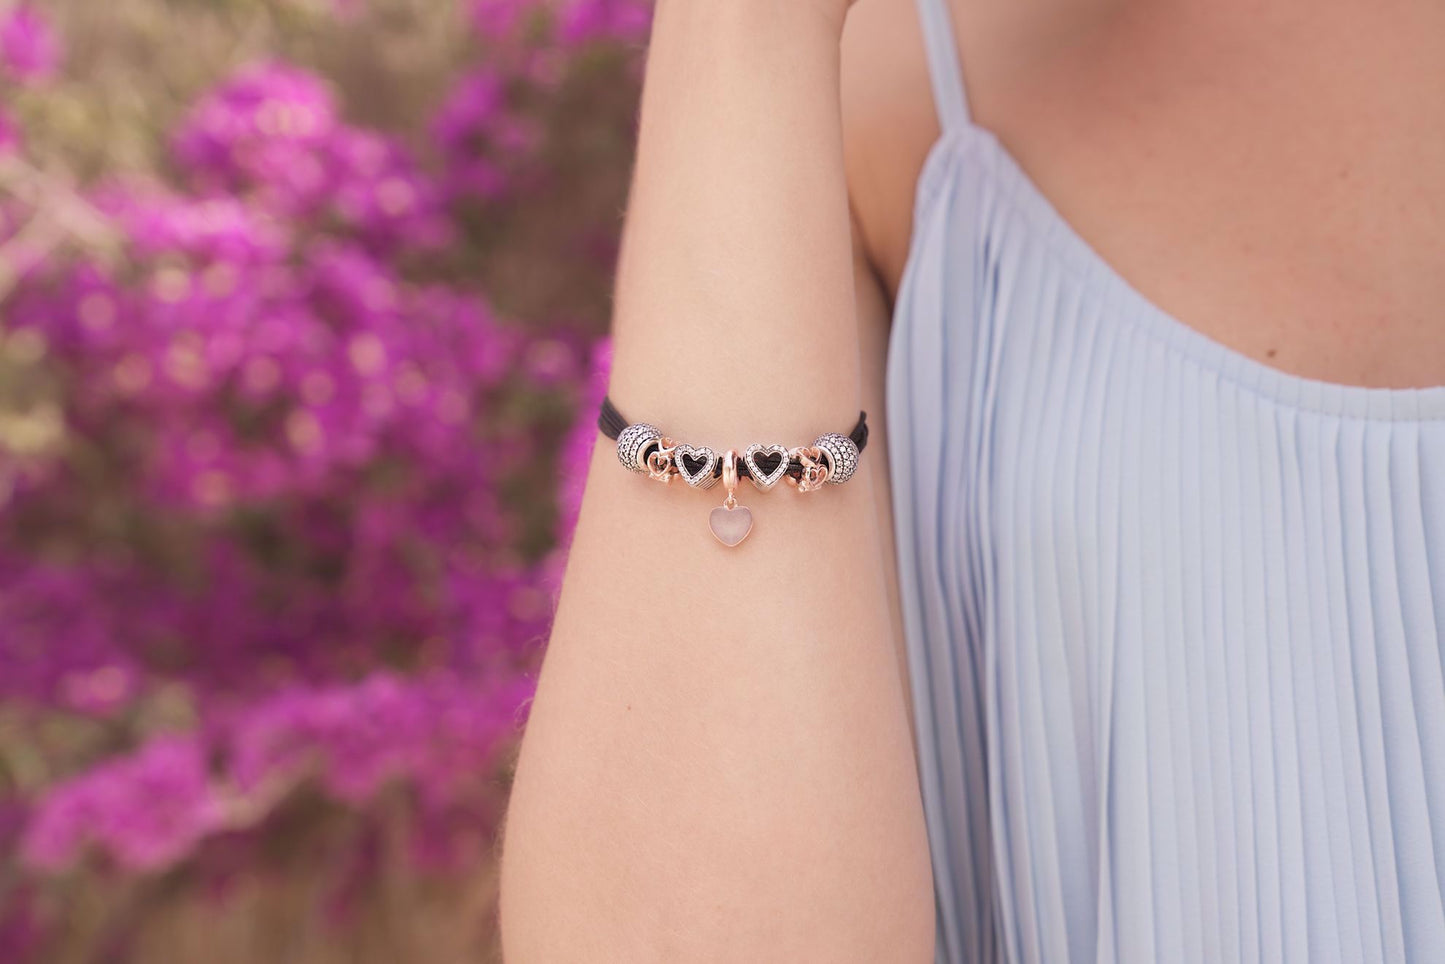 simple-love-the-heart-shaped-charm-rosegold